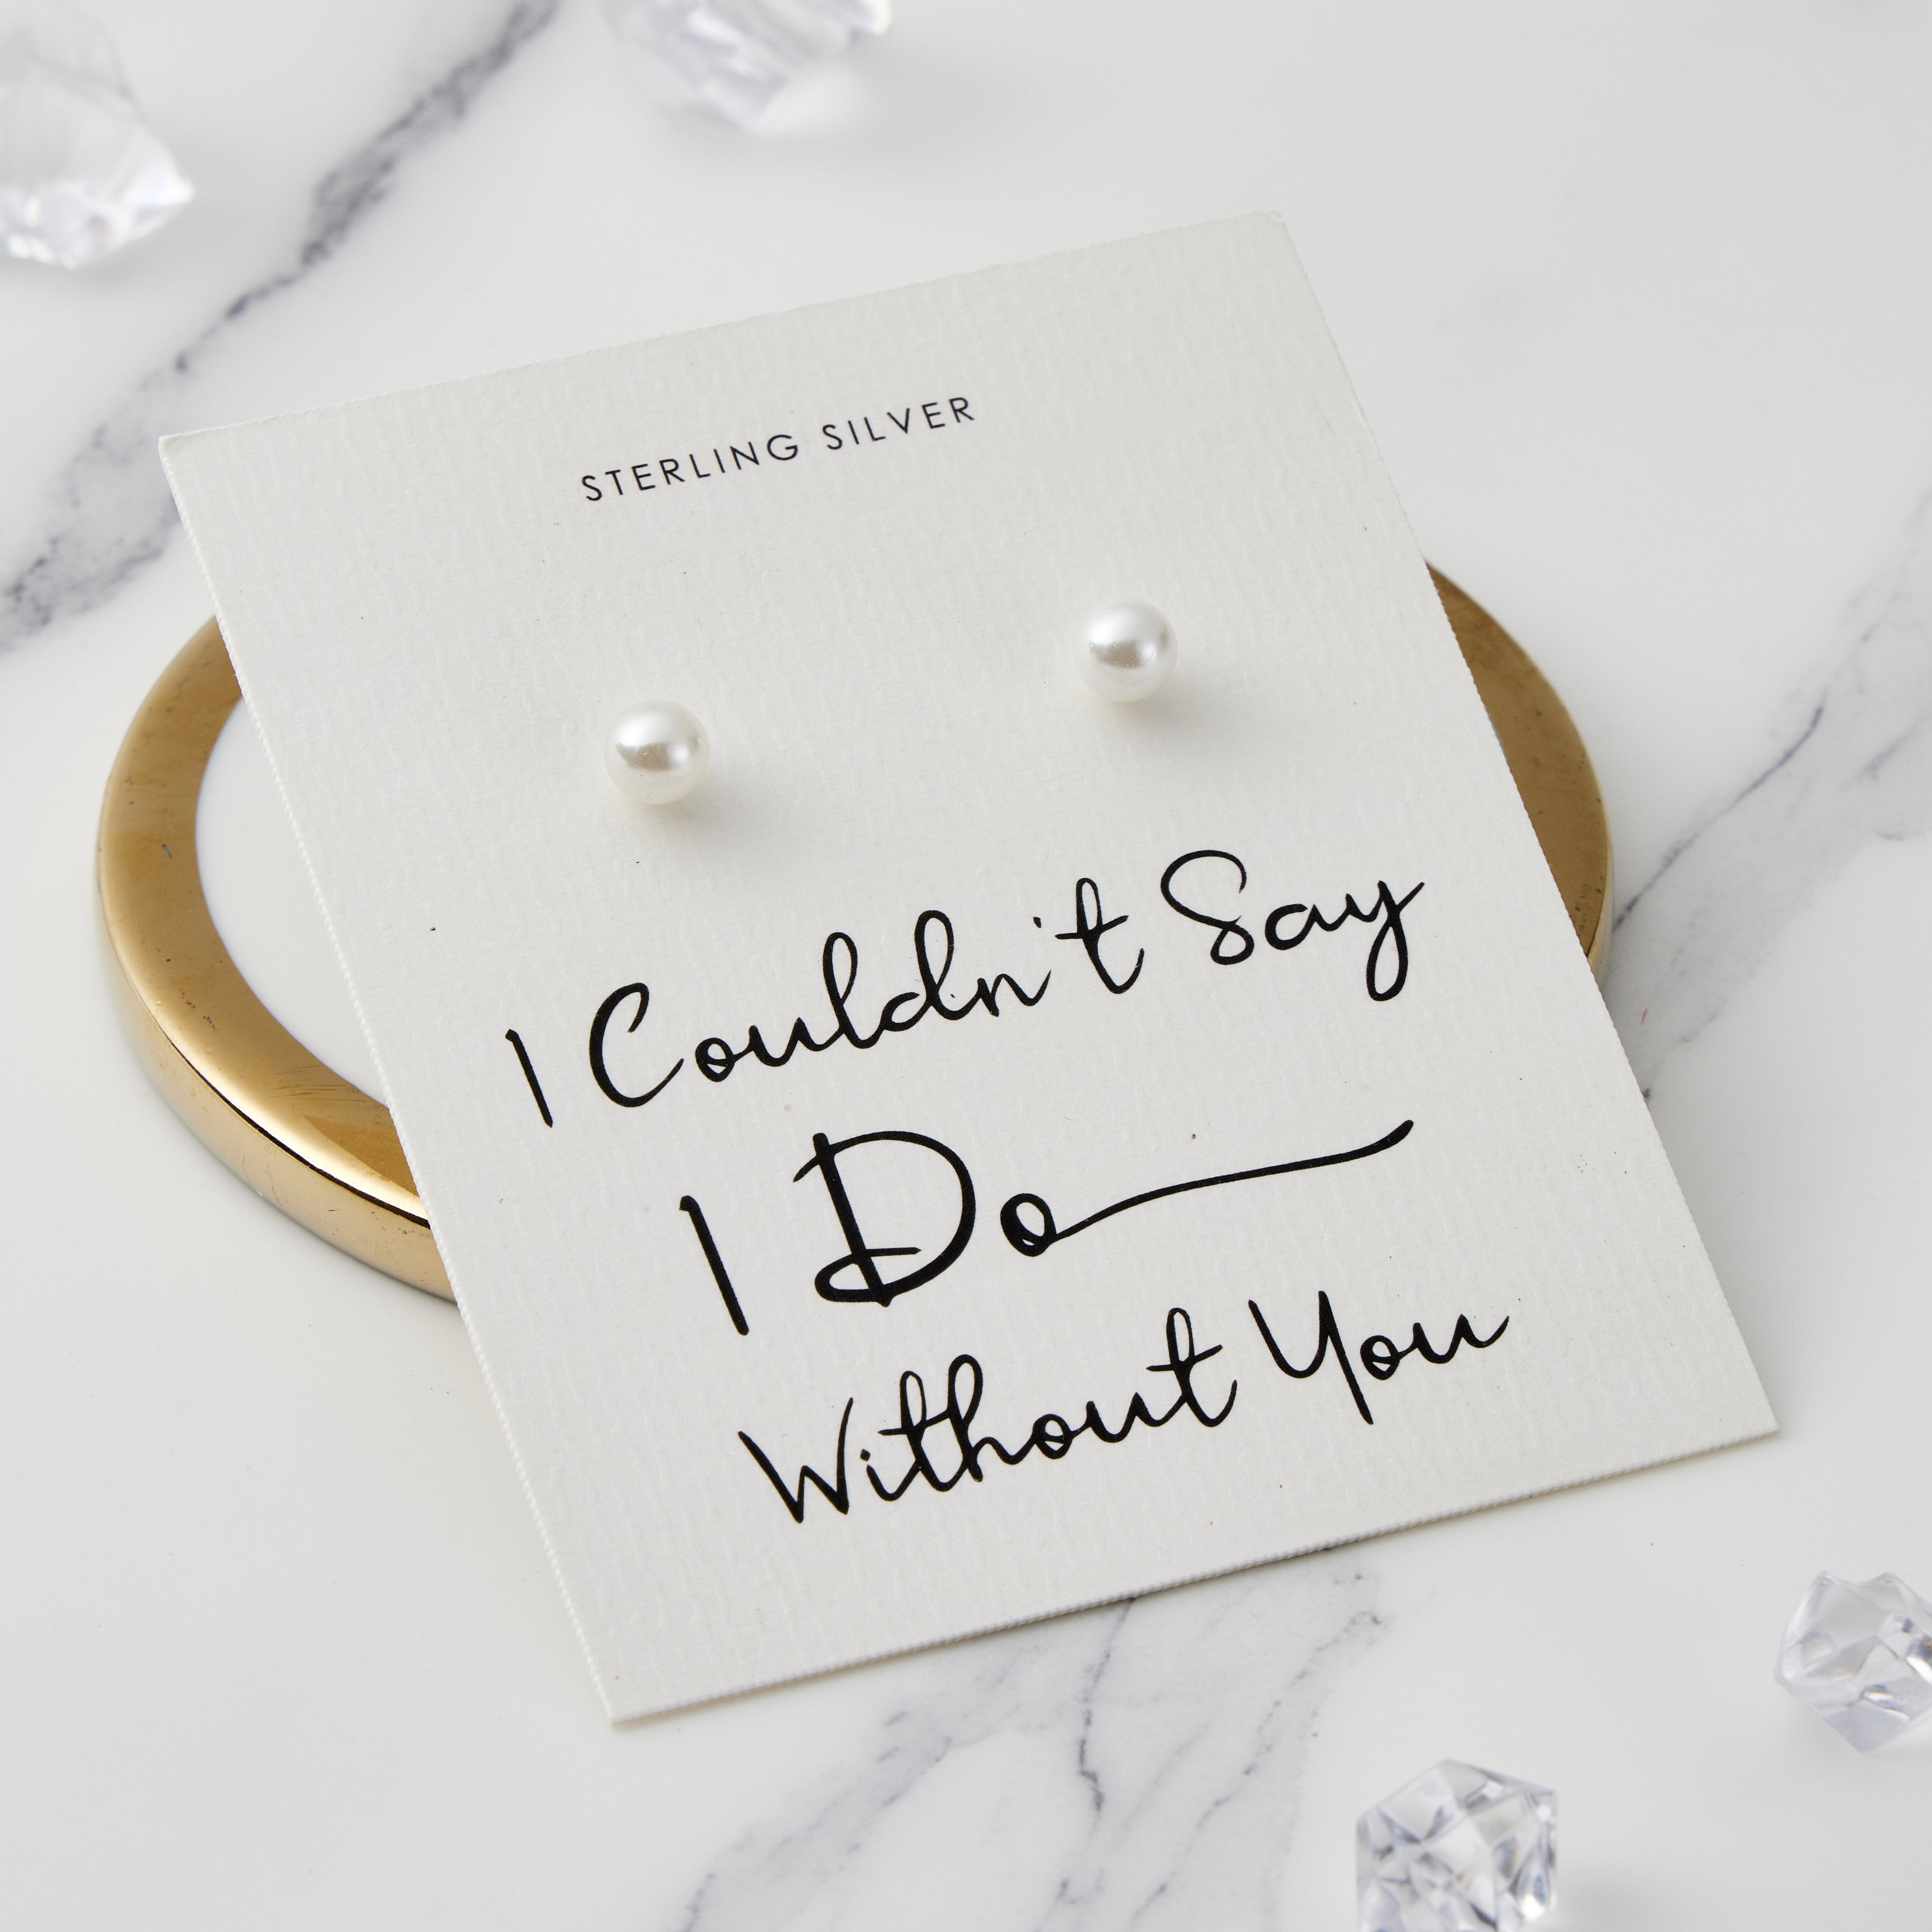 Sterling Silver I Couldn't Say I Do Without You Pearl Earrings